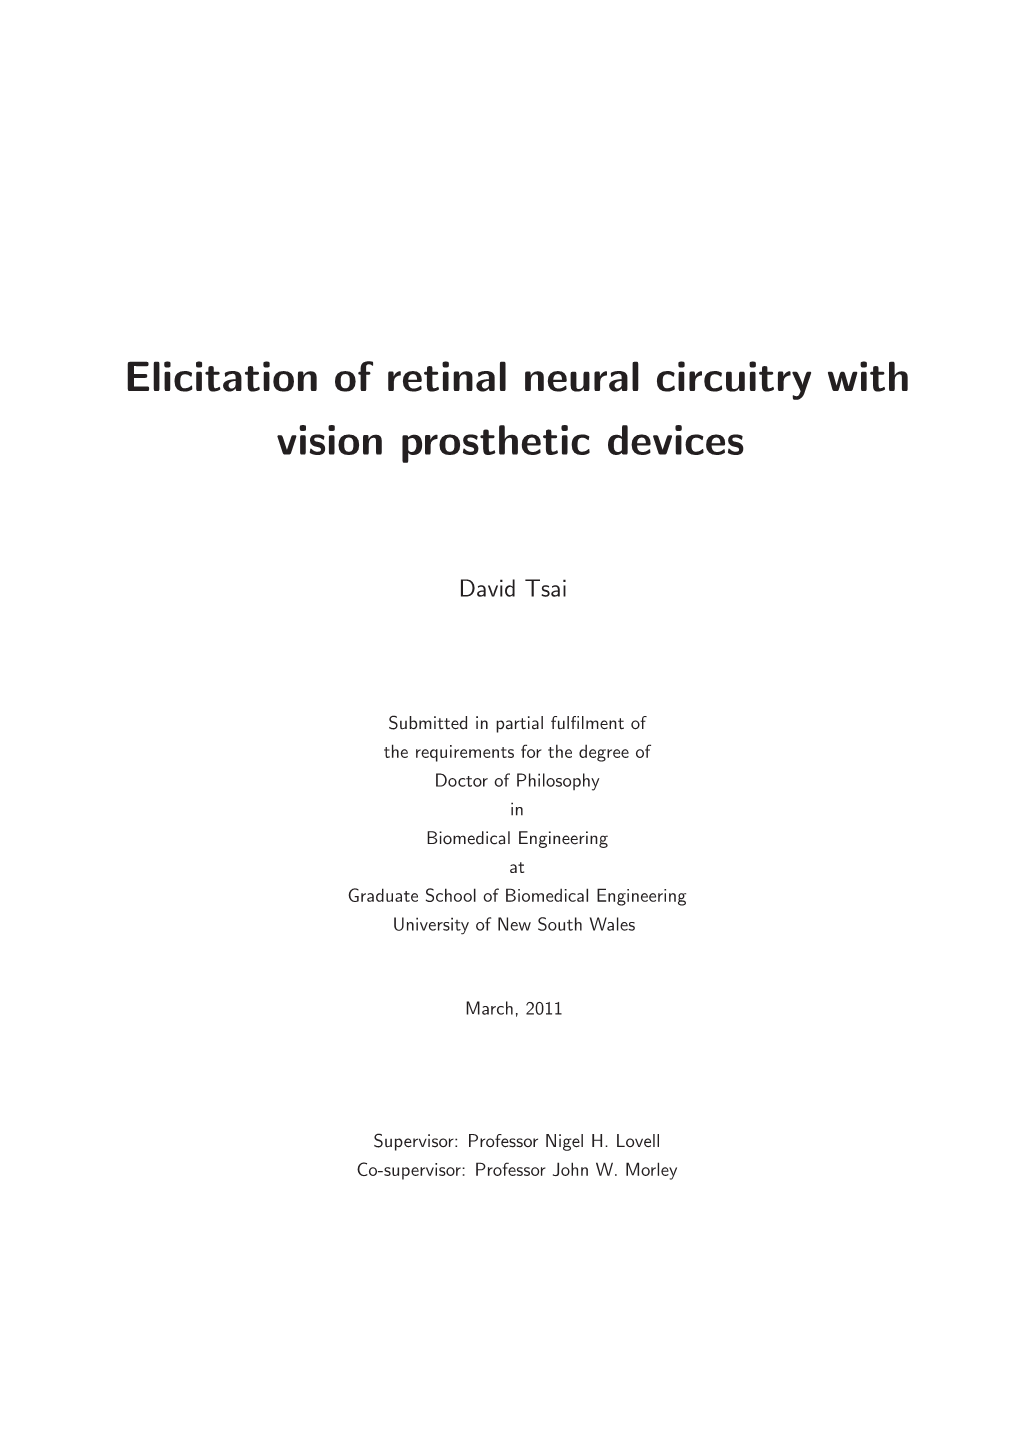 Elicitation of Retinal Neural Circuitry with Vision Prosthetic Devices